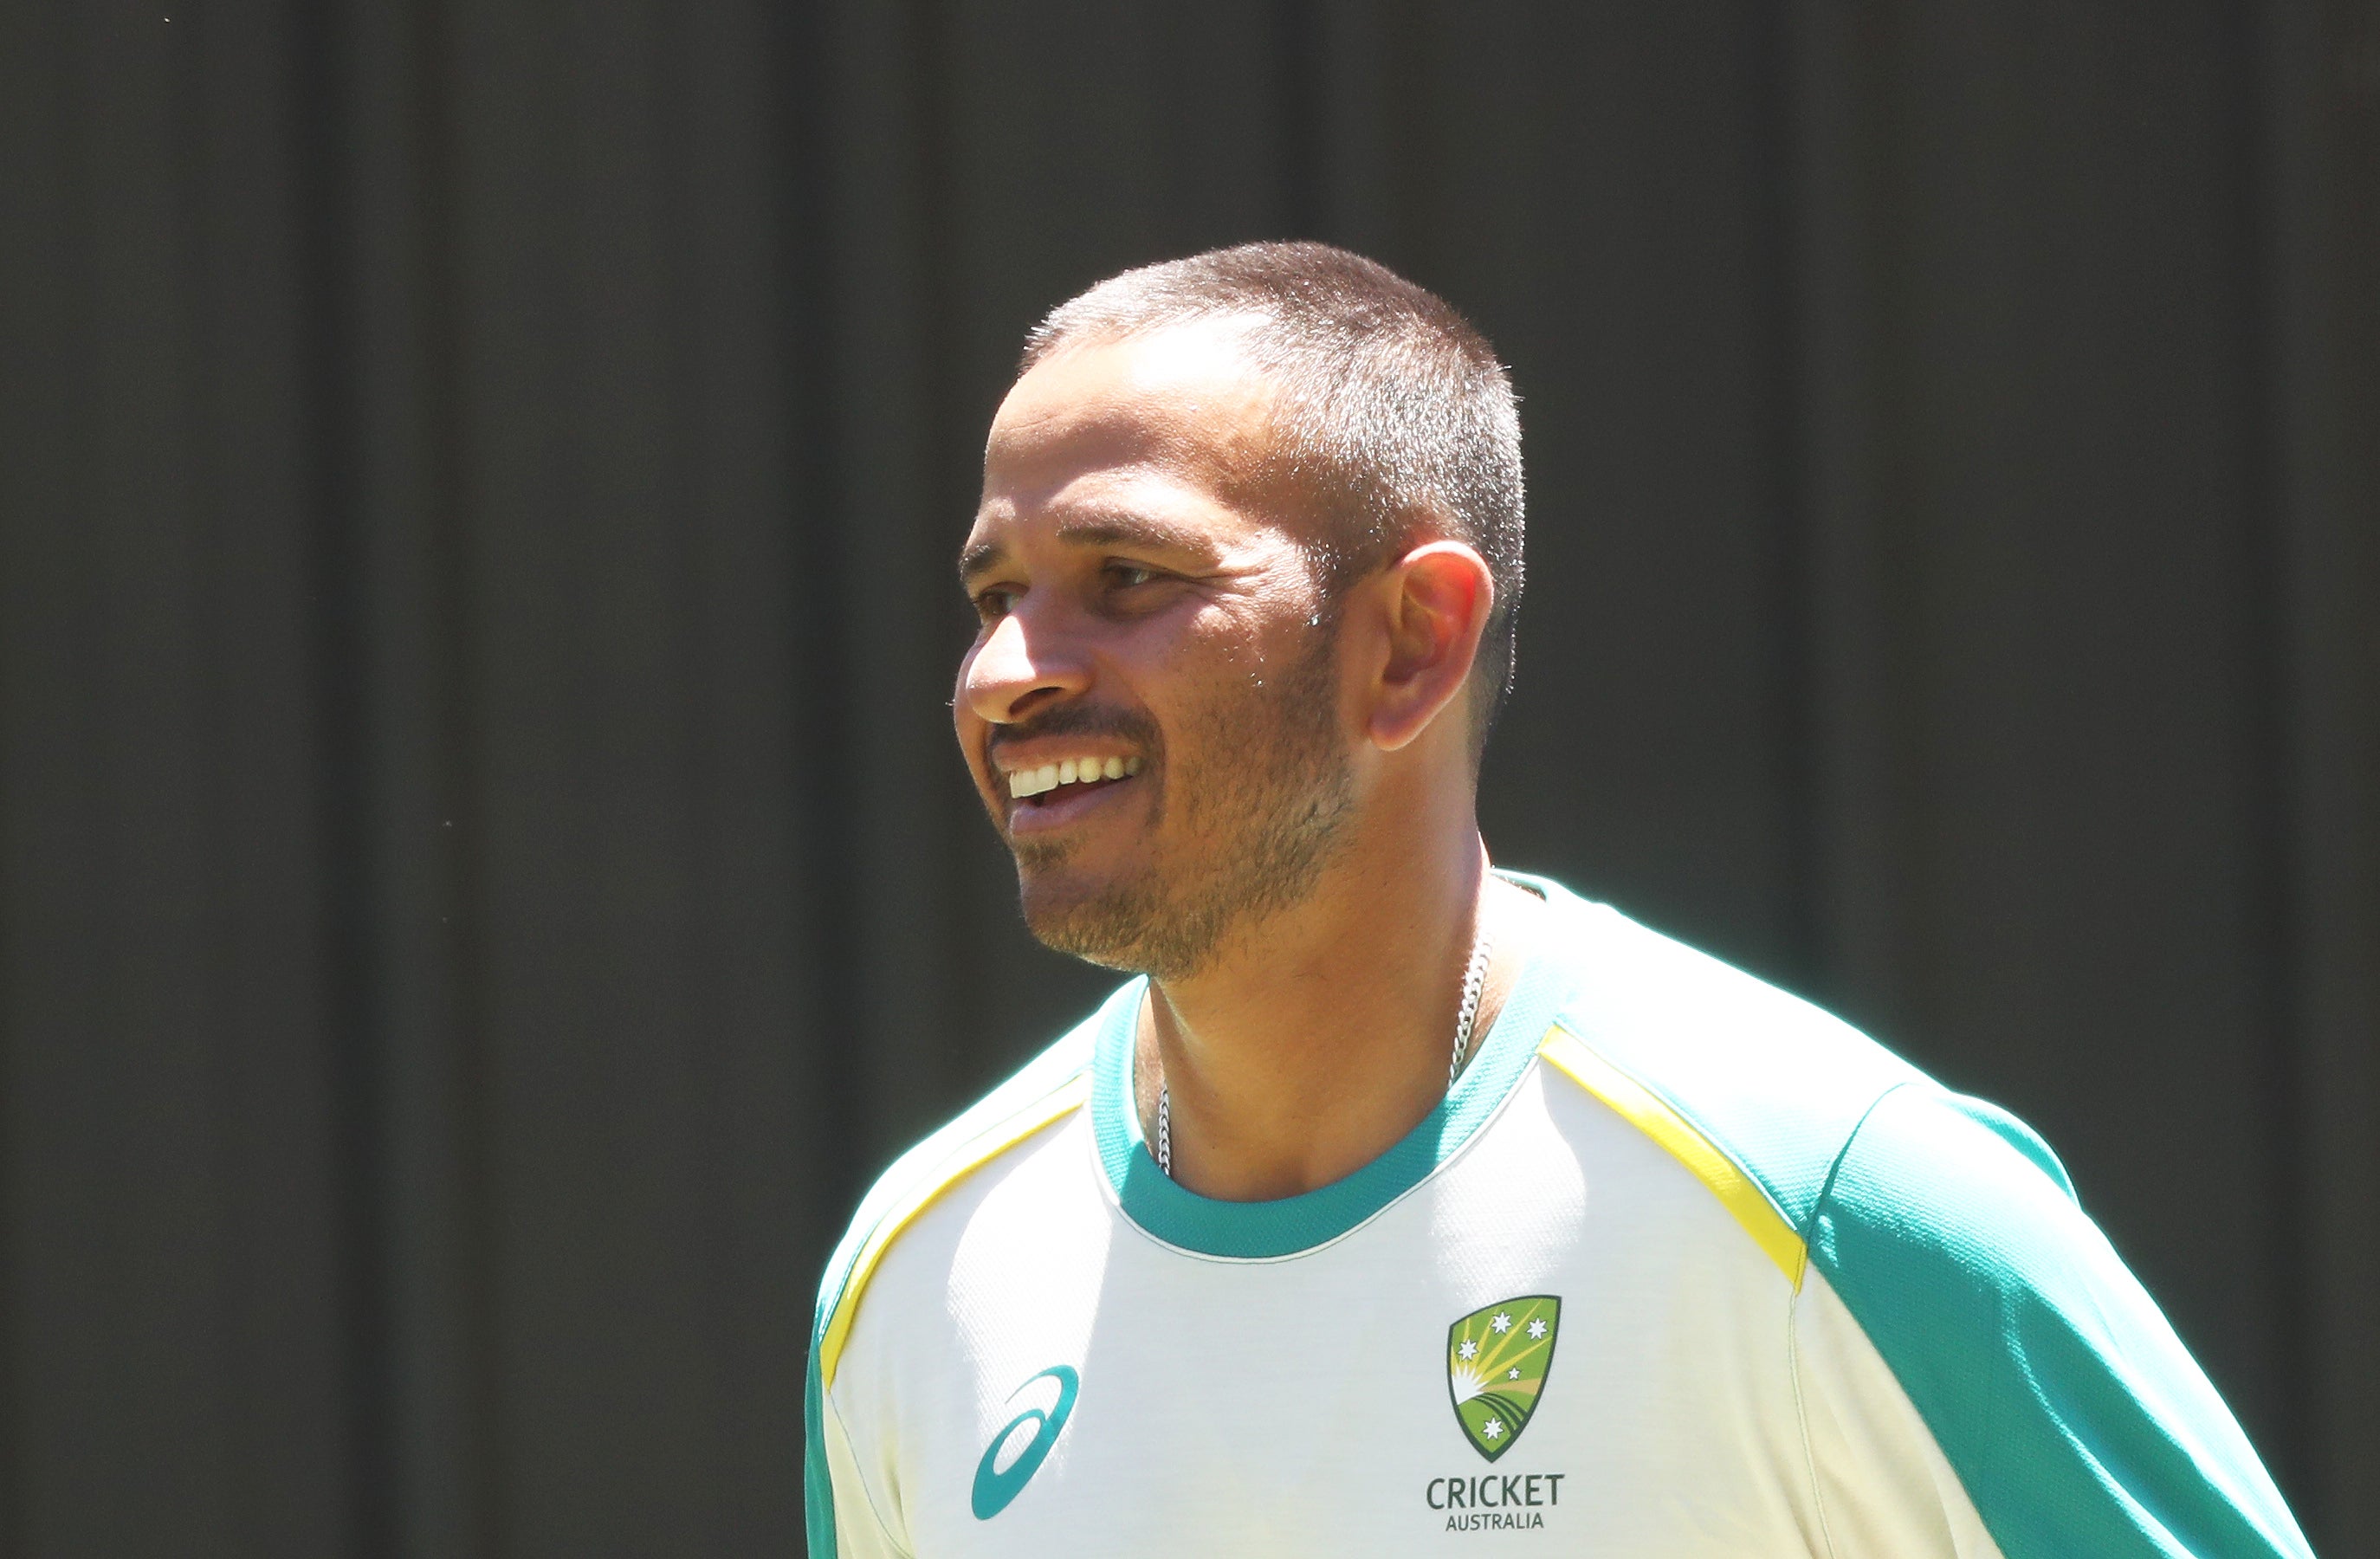 Regular 12th man Khawaja looks set to get his chance against England